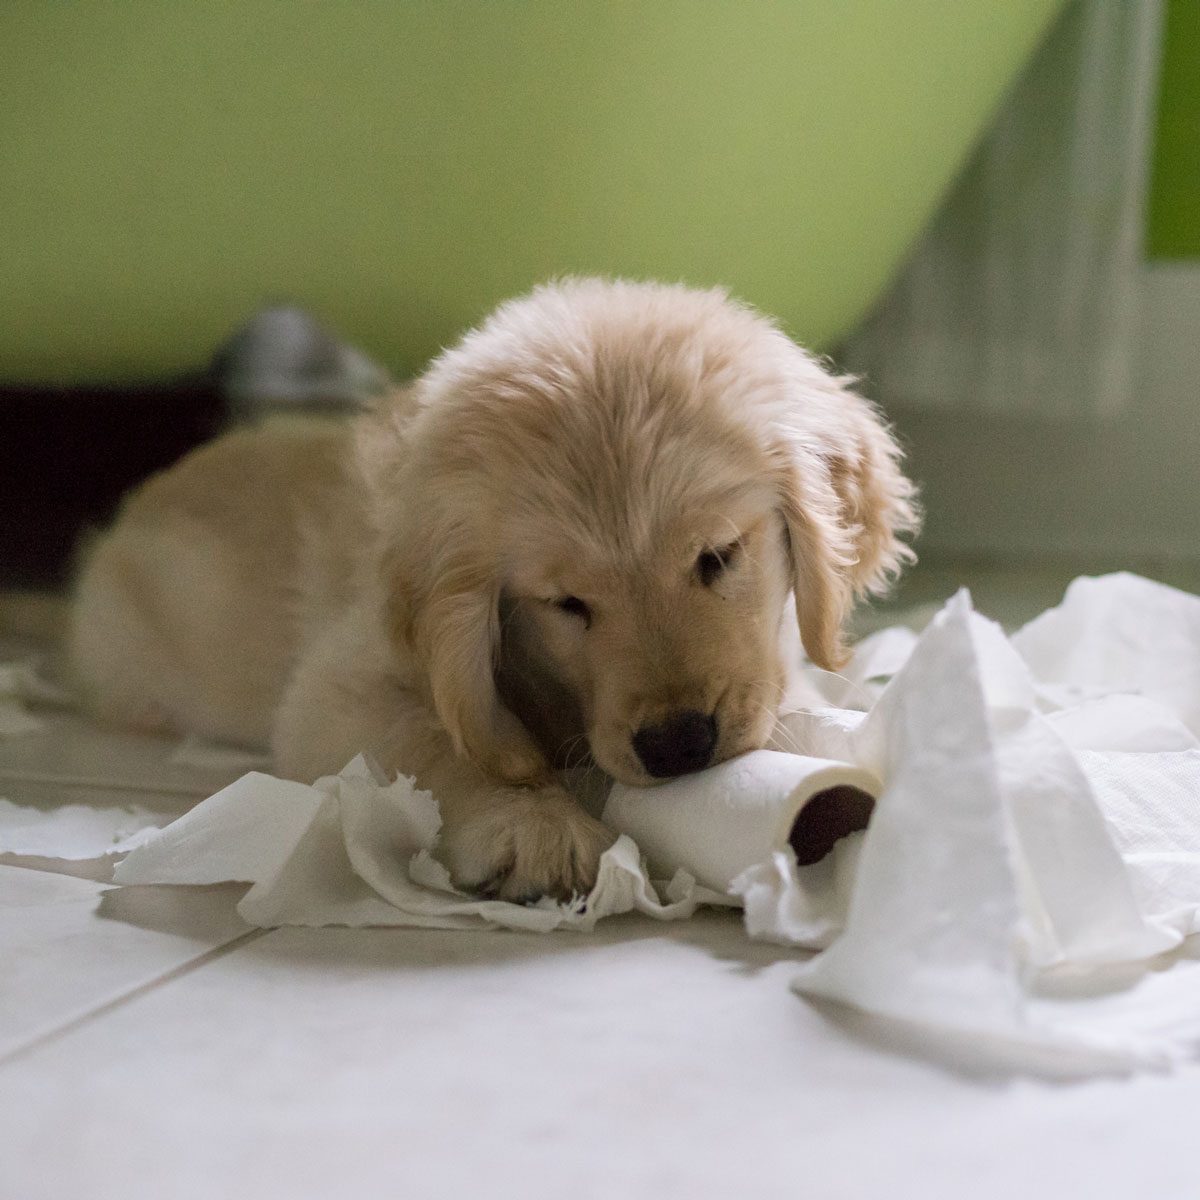 https://www.familyhandyman.com/wp-content/uploads/2020/06/puppy-with-toilet-paper-GettyImages-654683911.jpg